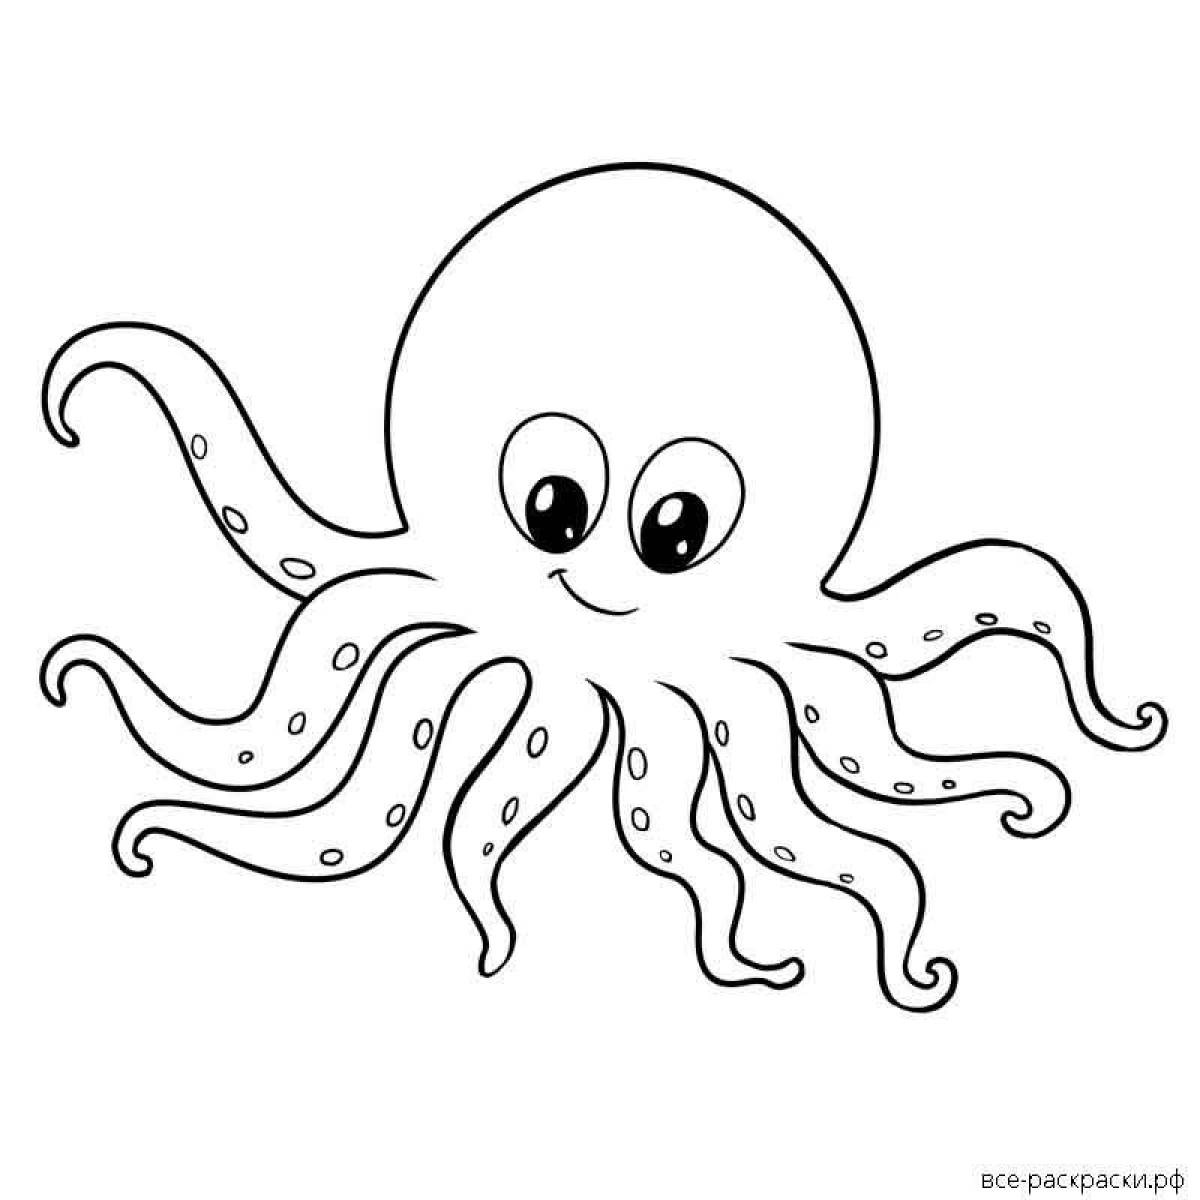 Exquisite octopus coloring book for kids